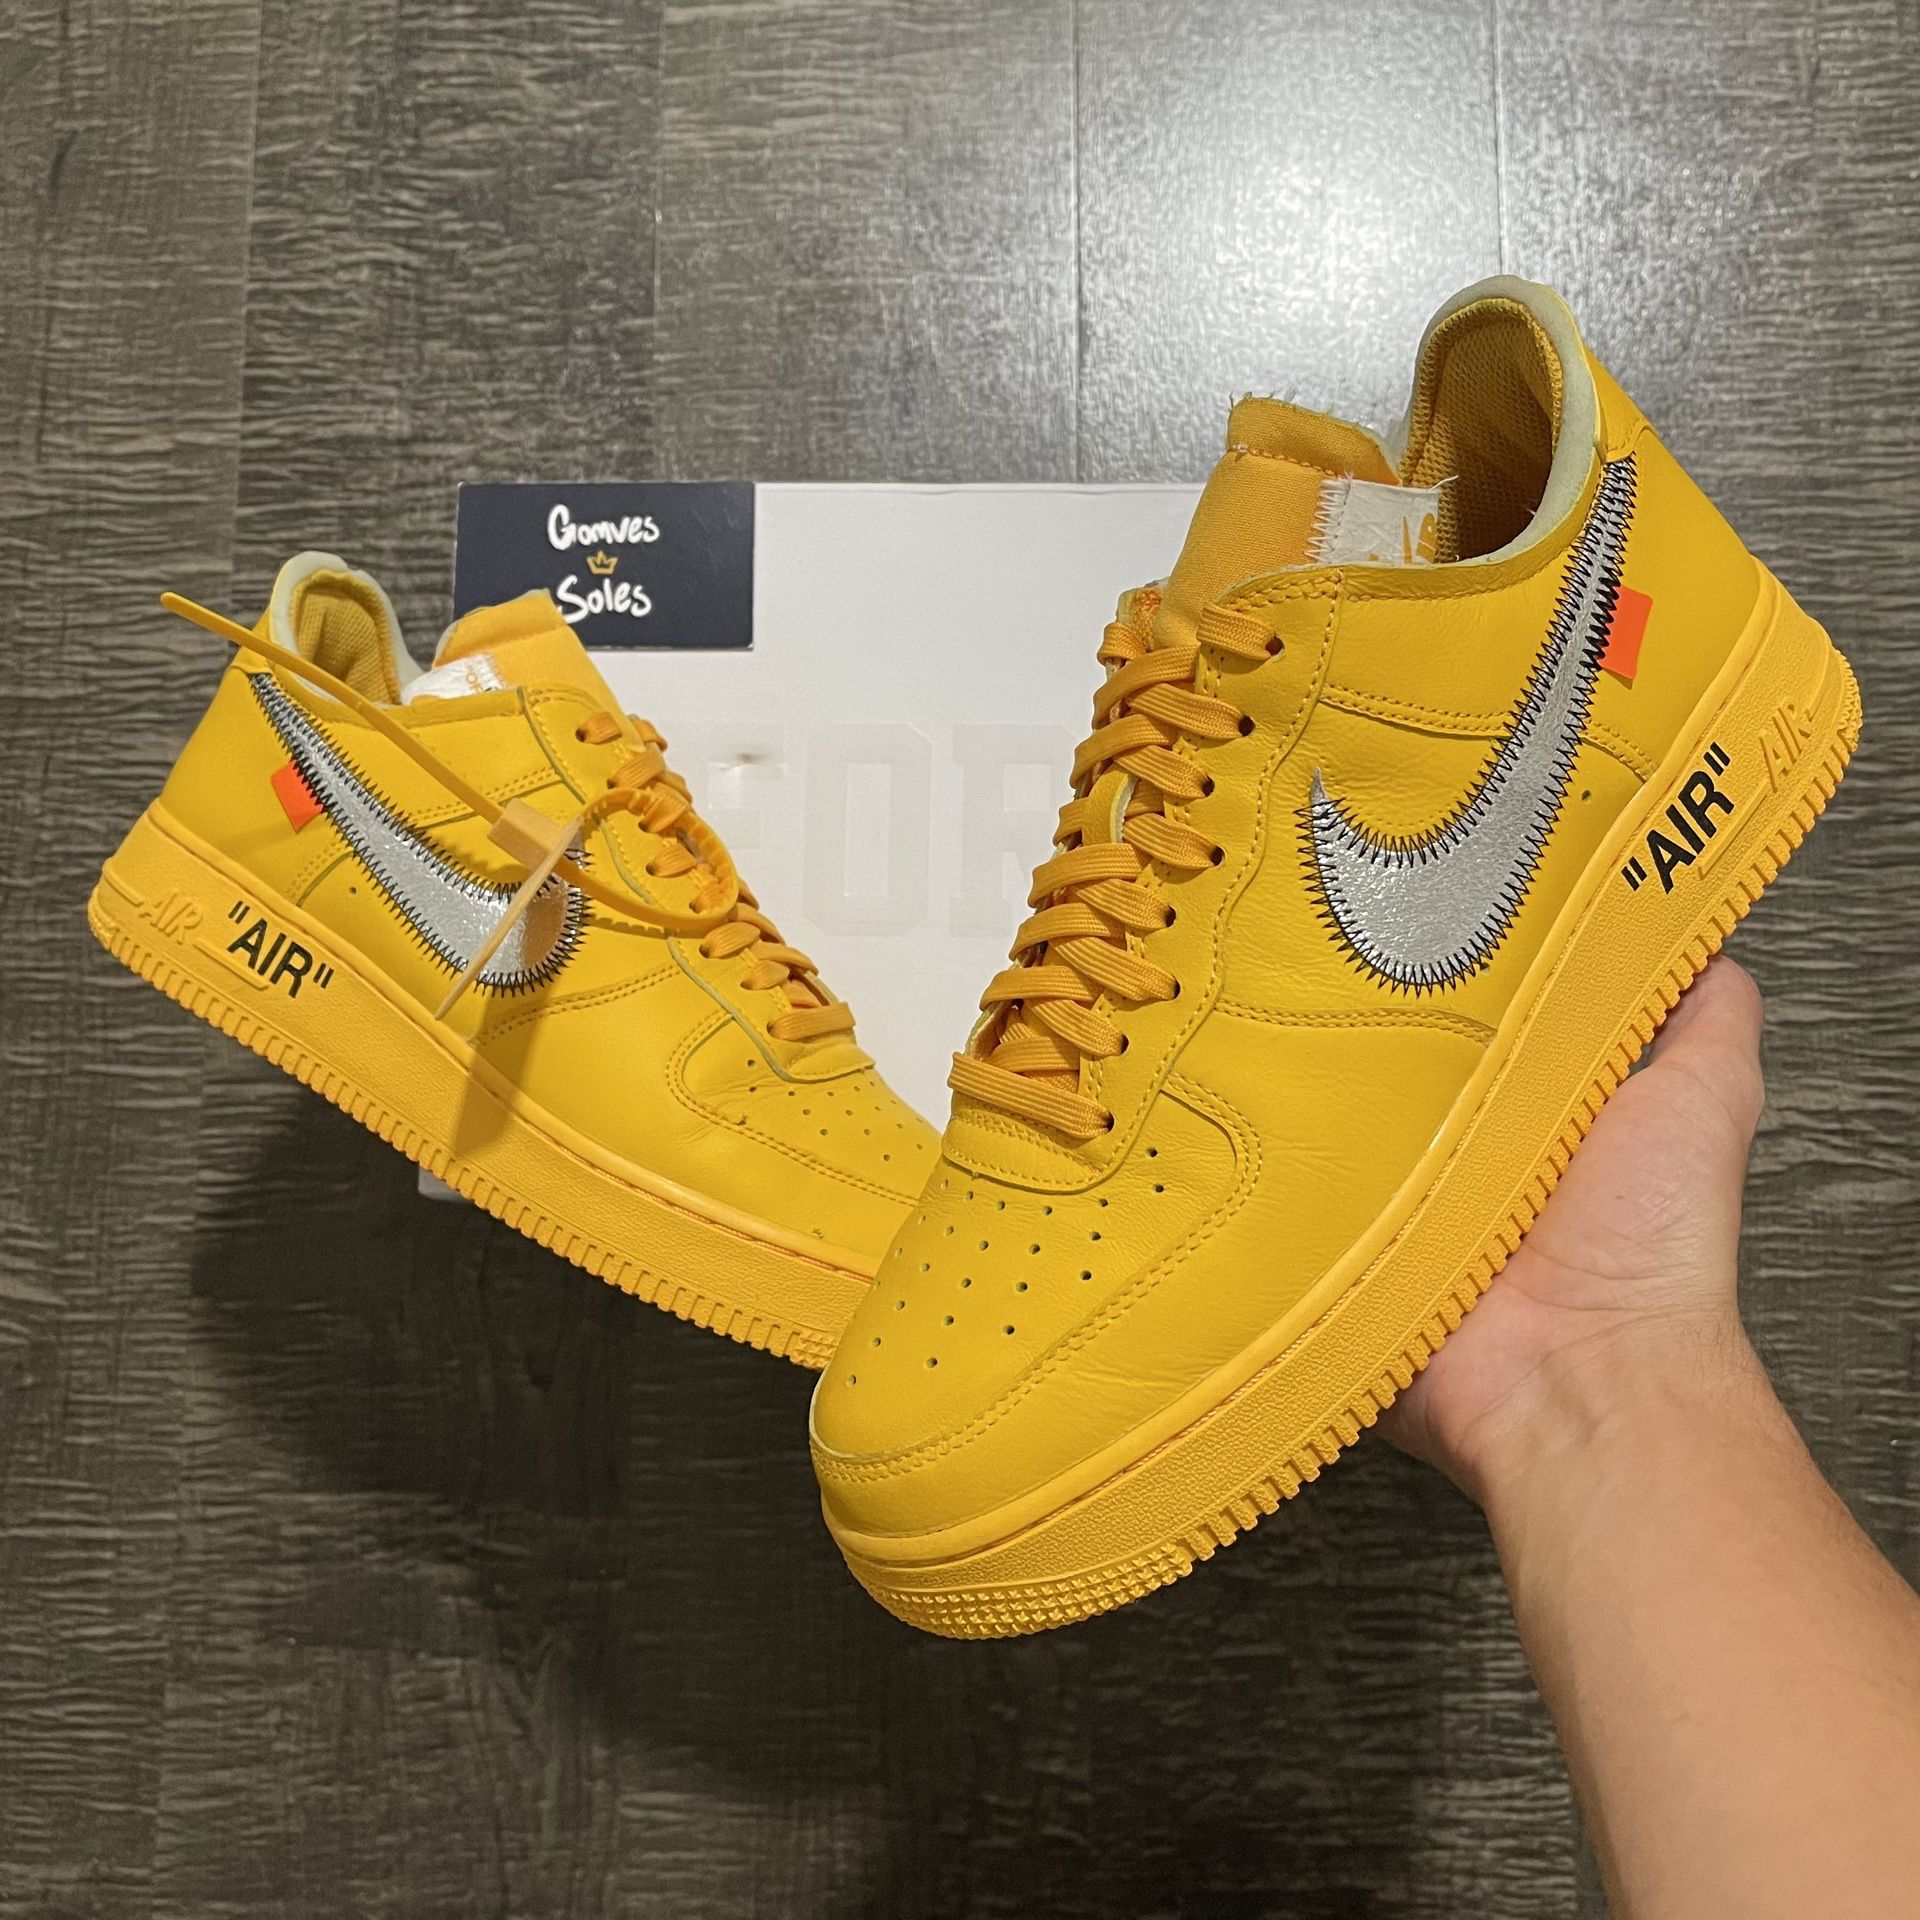 Nike Air Force 1 Low OFF-WHITE University Gold Lemonade ICA Size 10.5